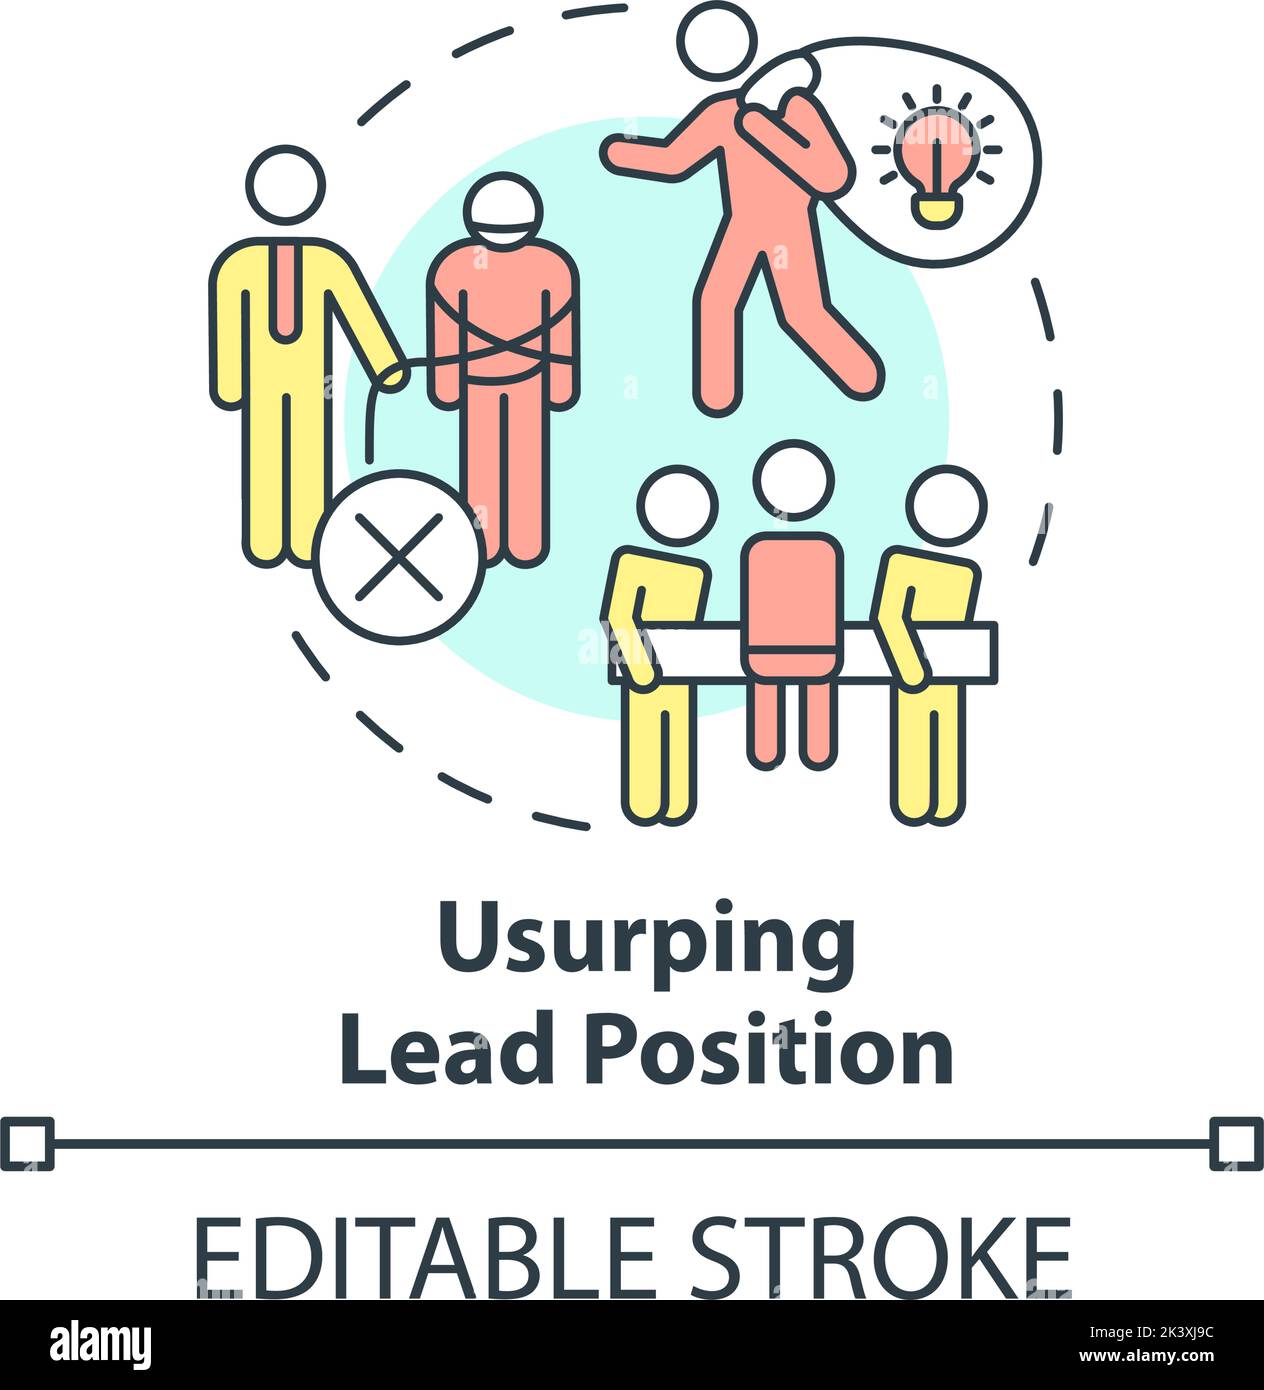 Usurping lead position concept icon Stock Vector